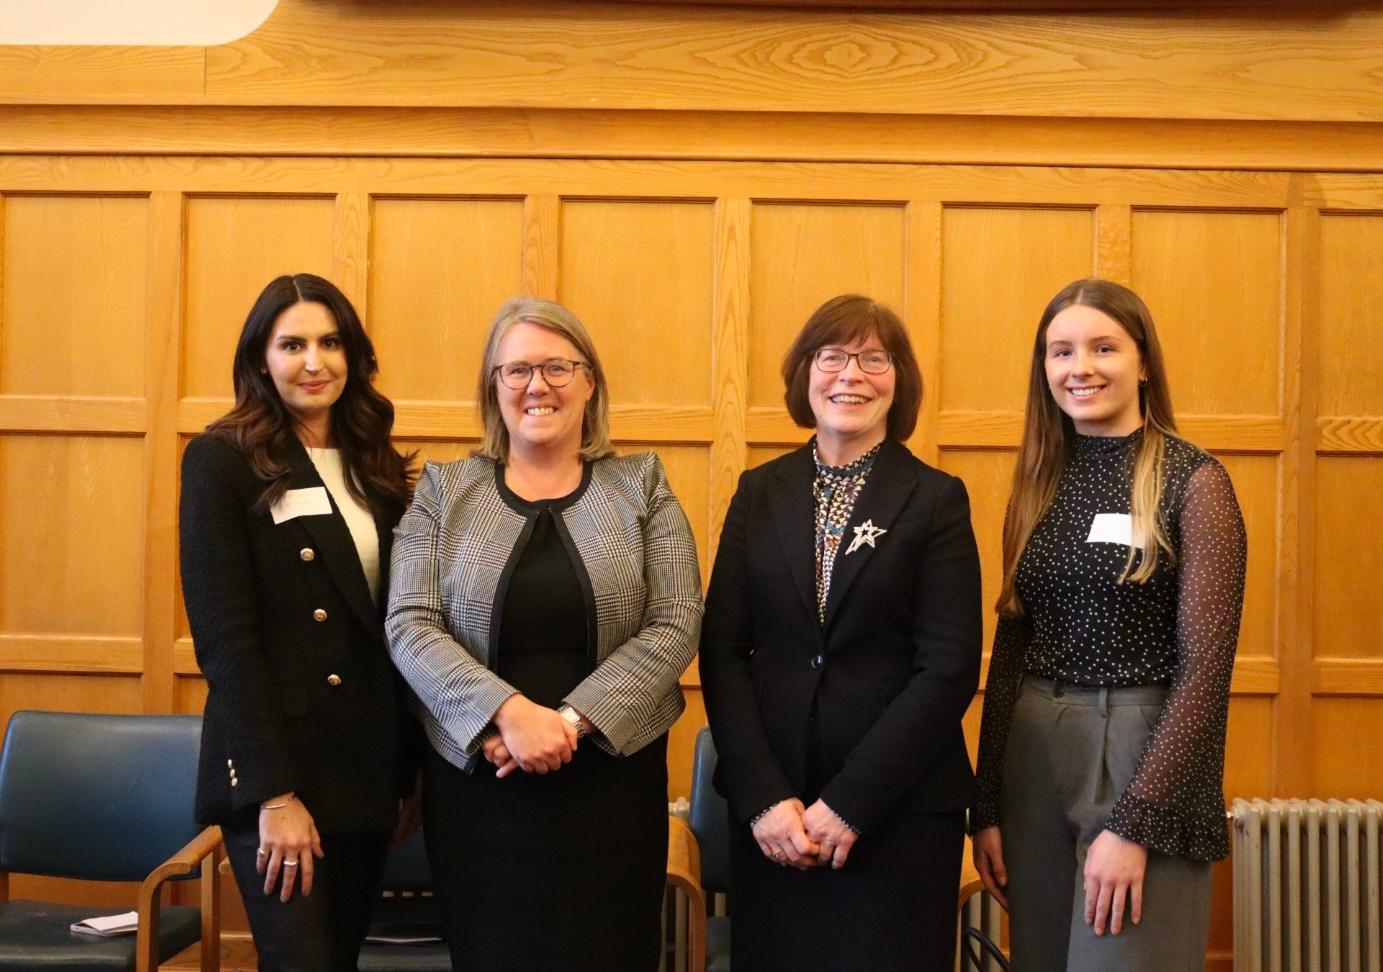 Lady Chief Justice and trailblazing High Court judge address Belfast women lawyers' event